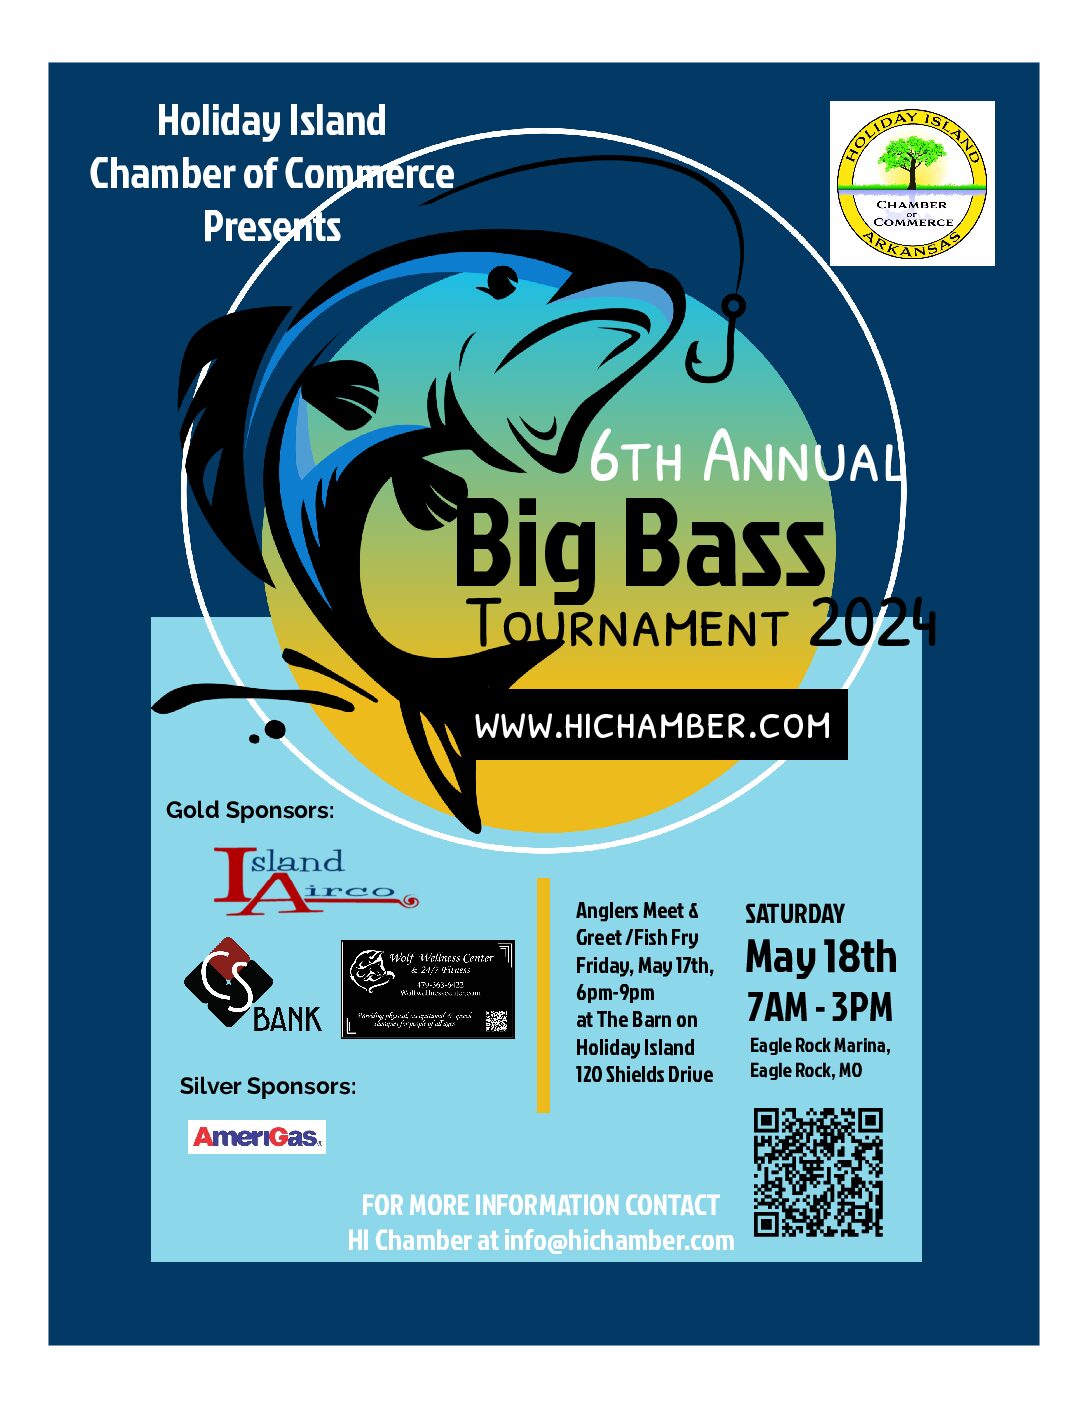 Featured image for “Big Bass Tournament – Holiday Island”